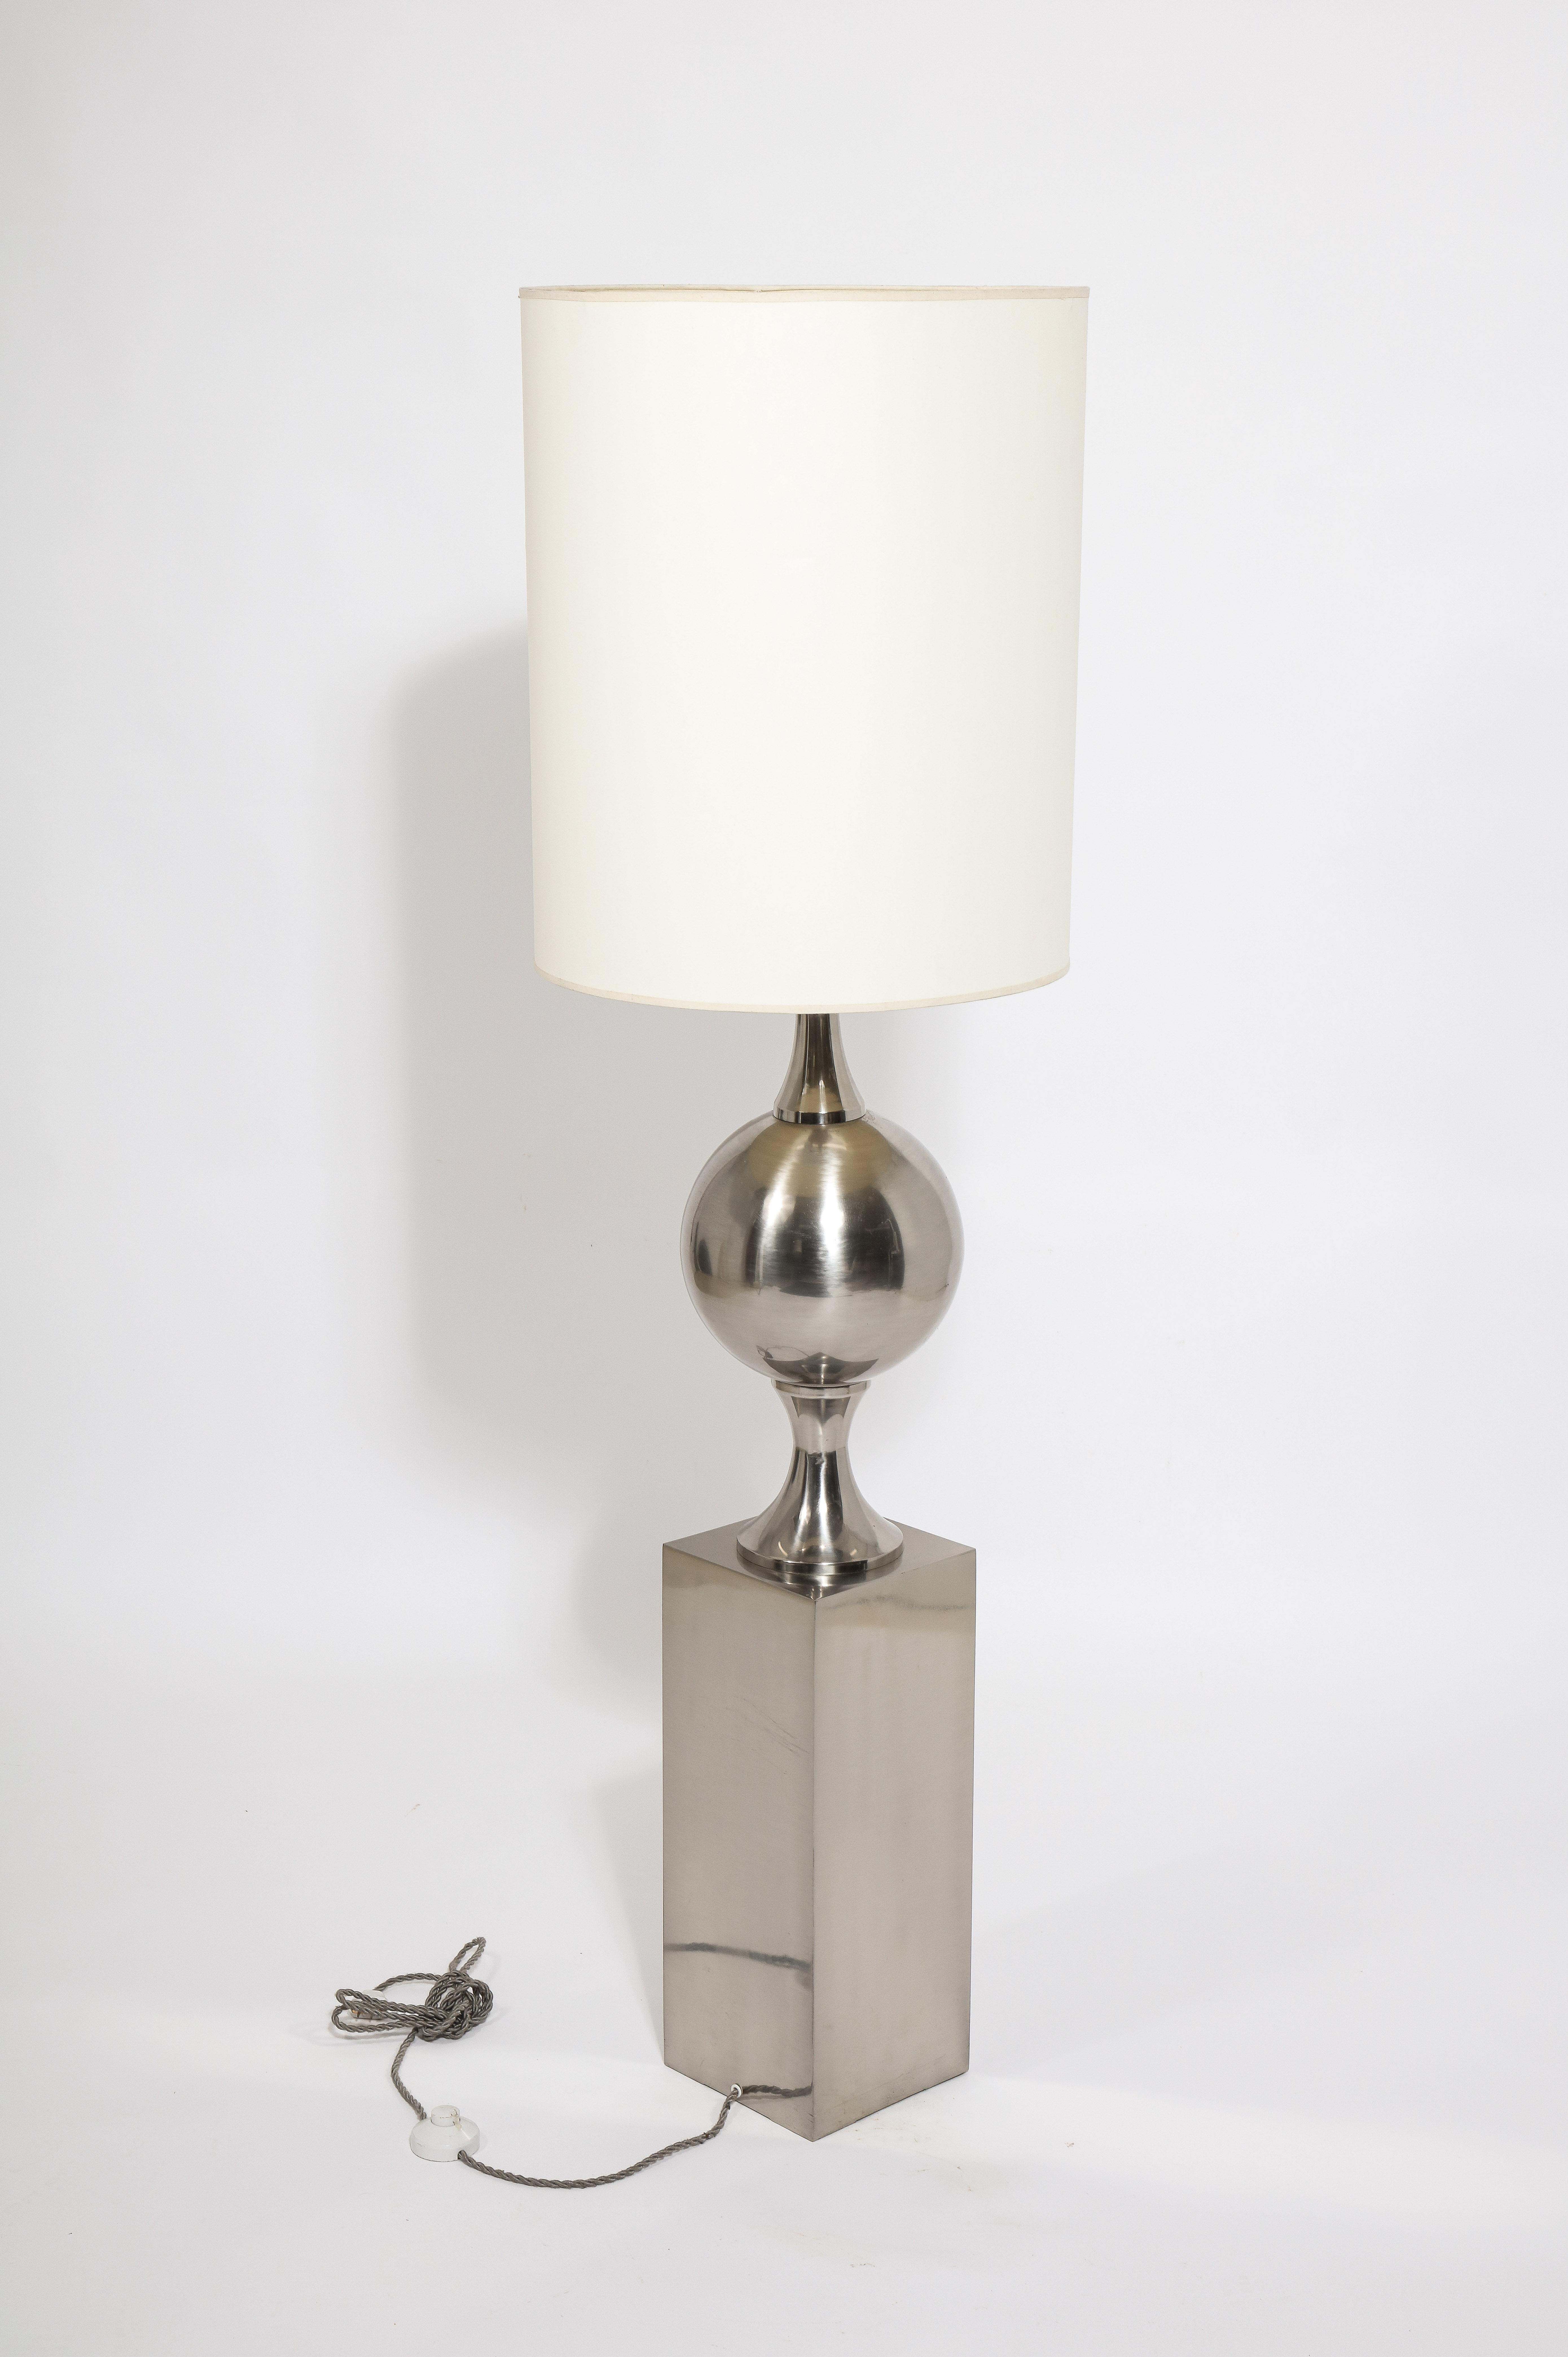 Barbier Floor Lamp in Nickel Plated Brass, France 1970's For Sale 3